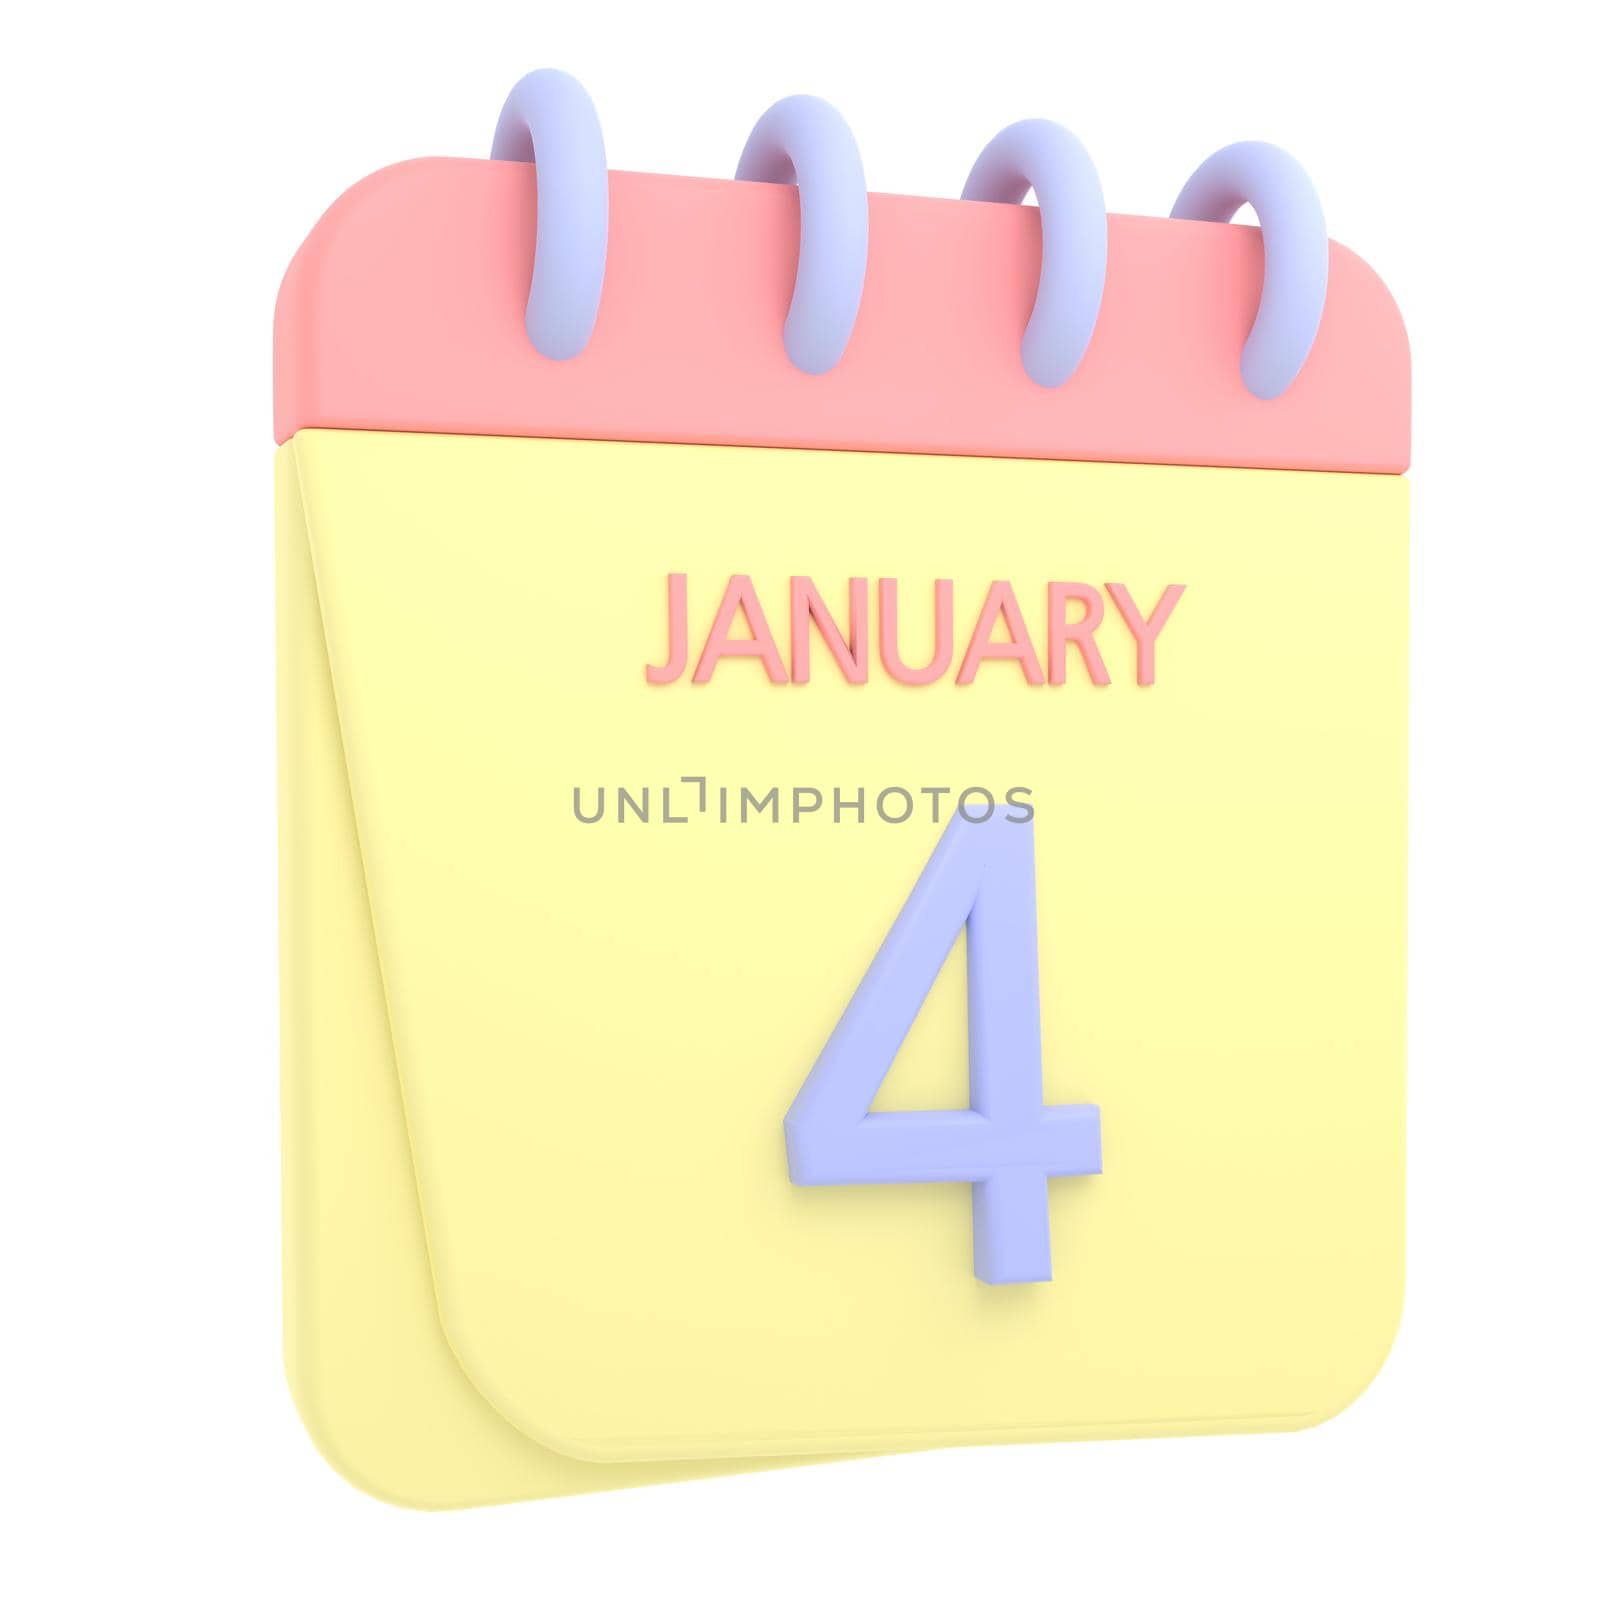 4th January 3D calendar icon. Web style. High resolution image. White background